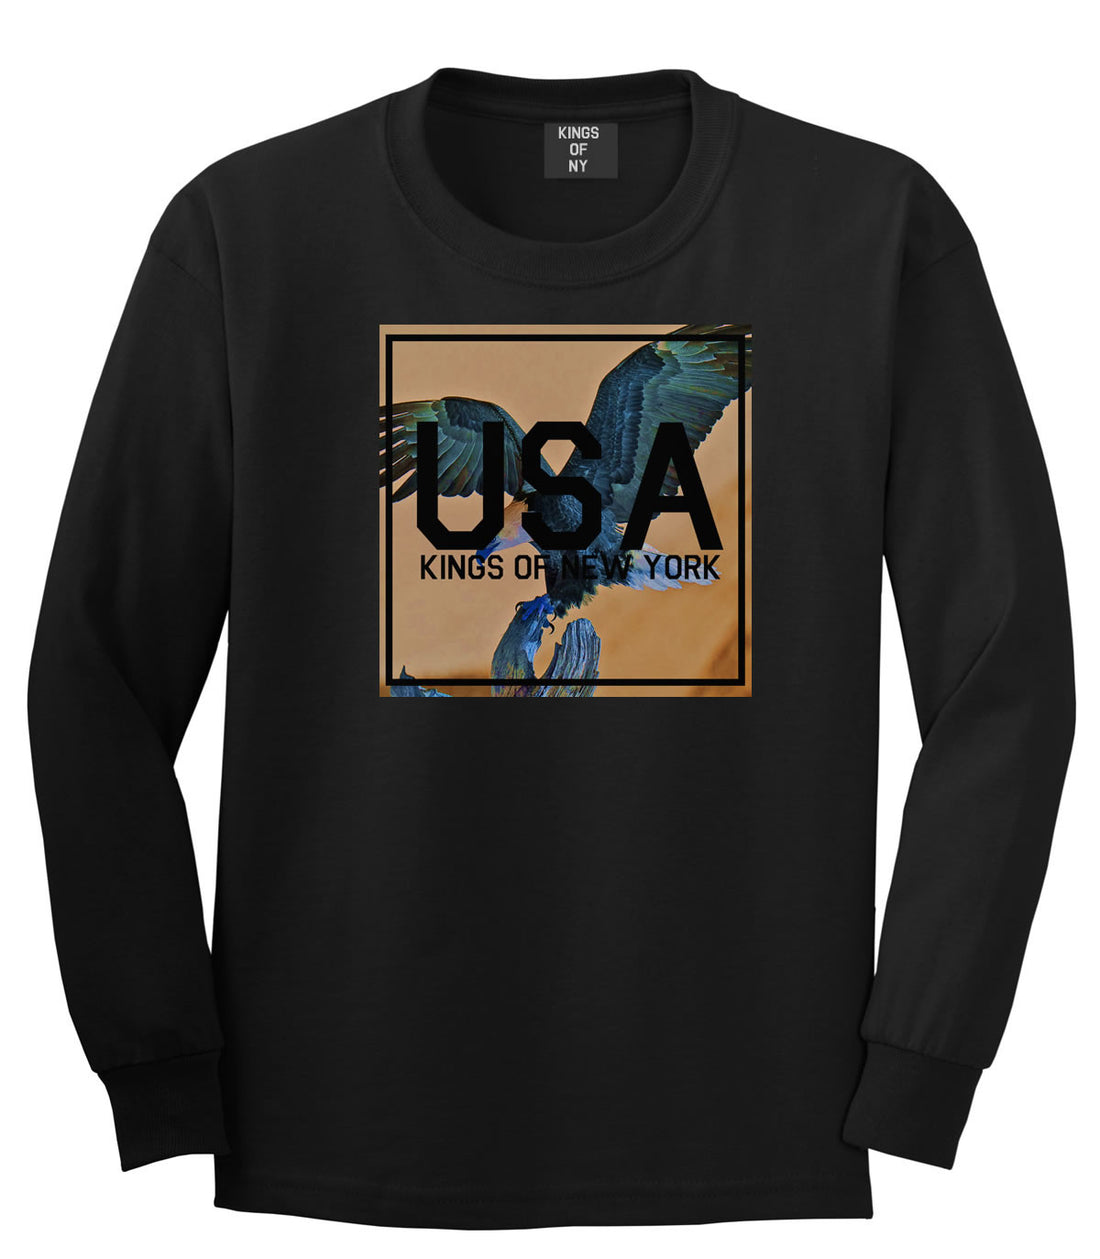 USA Bald Eagle America Long Sleeve T-Shirt in Black By Kings Of NY